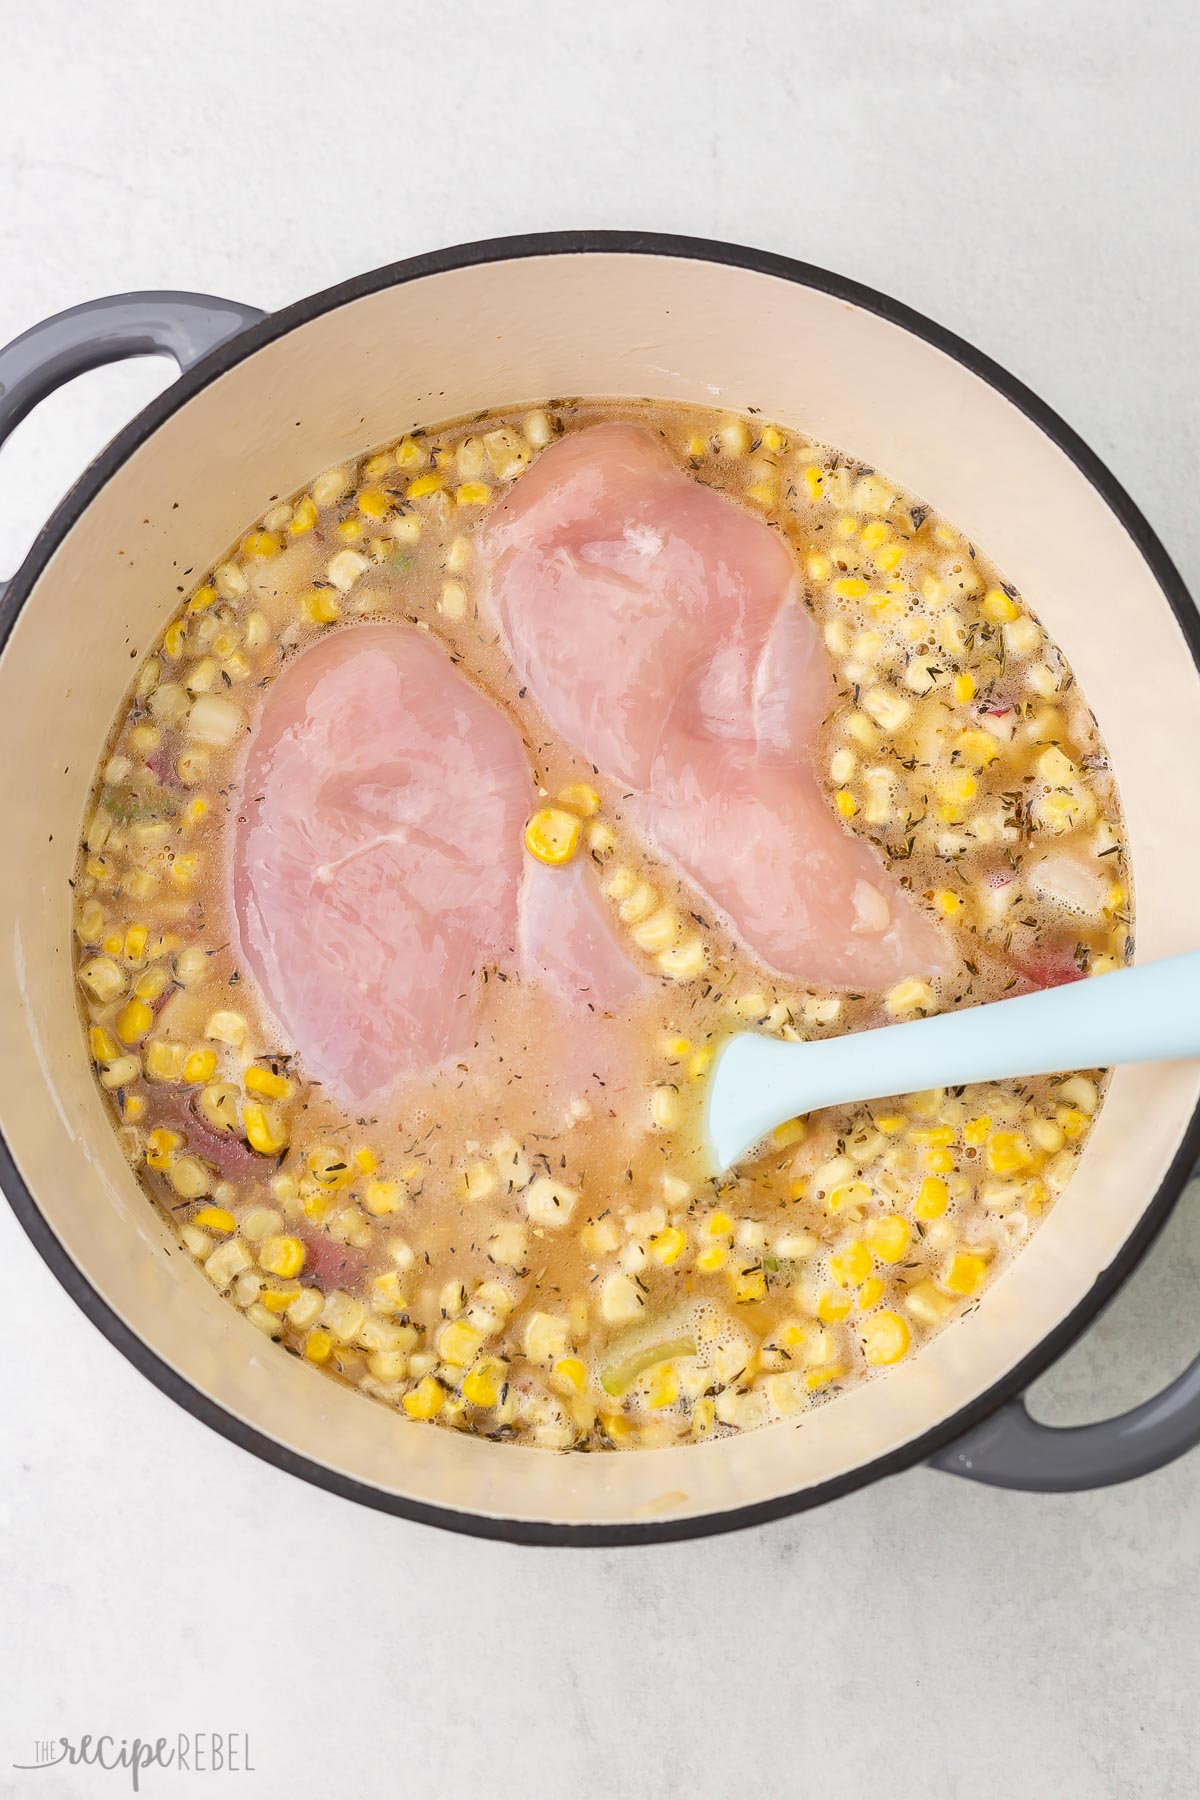 corn potatoes and raw chicken added to soup to simmer.